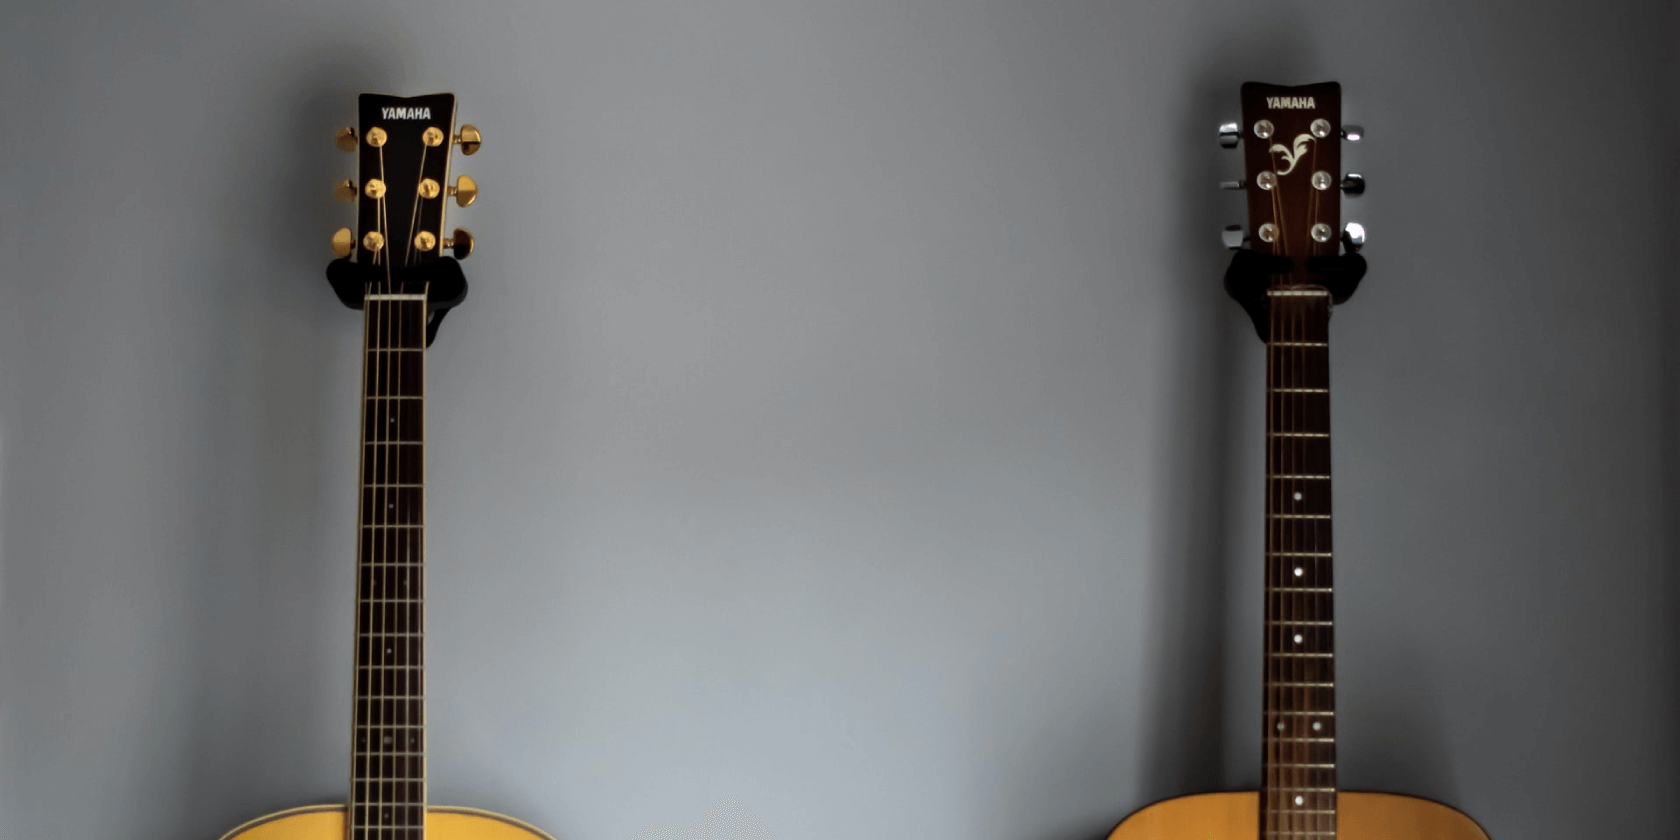 mount guitar on your wall